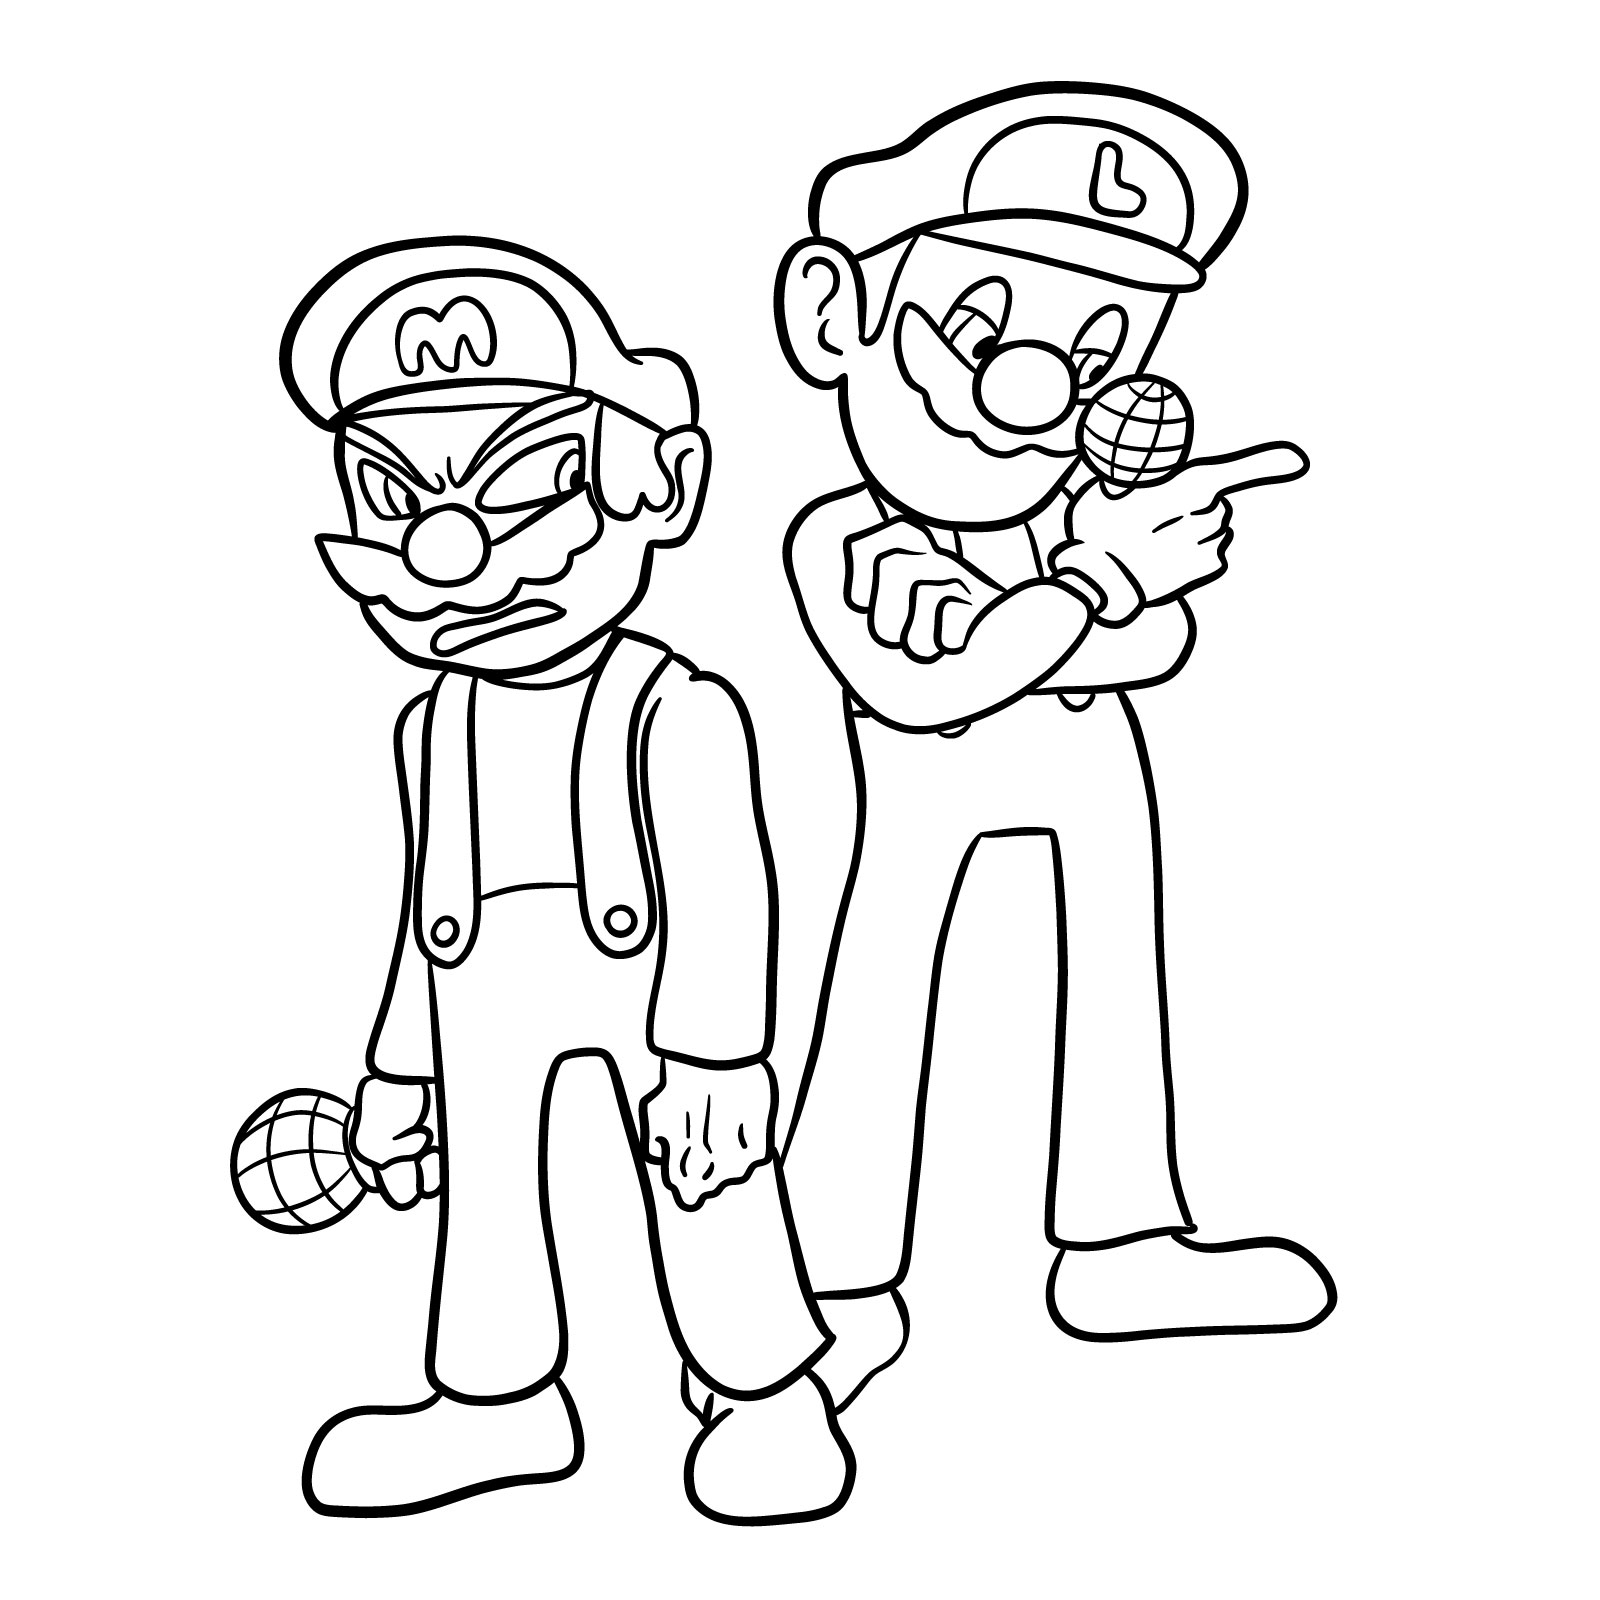 How to draw Mario and Luigi from Tails Gets Trolled - final step